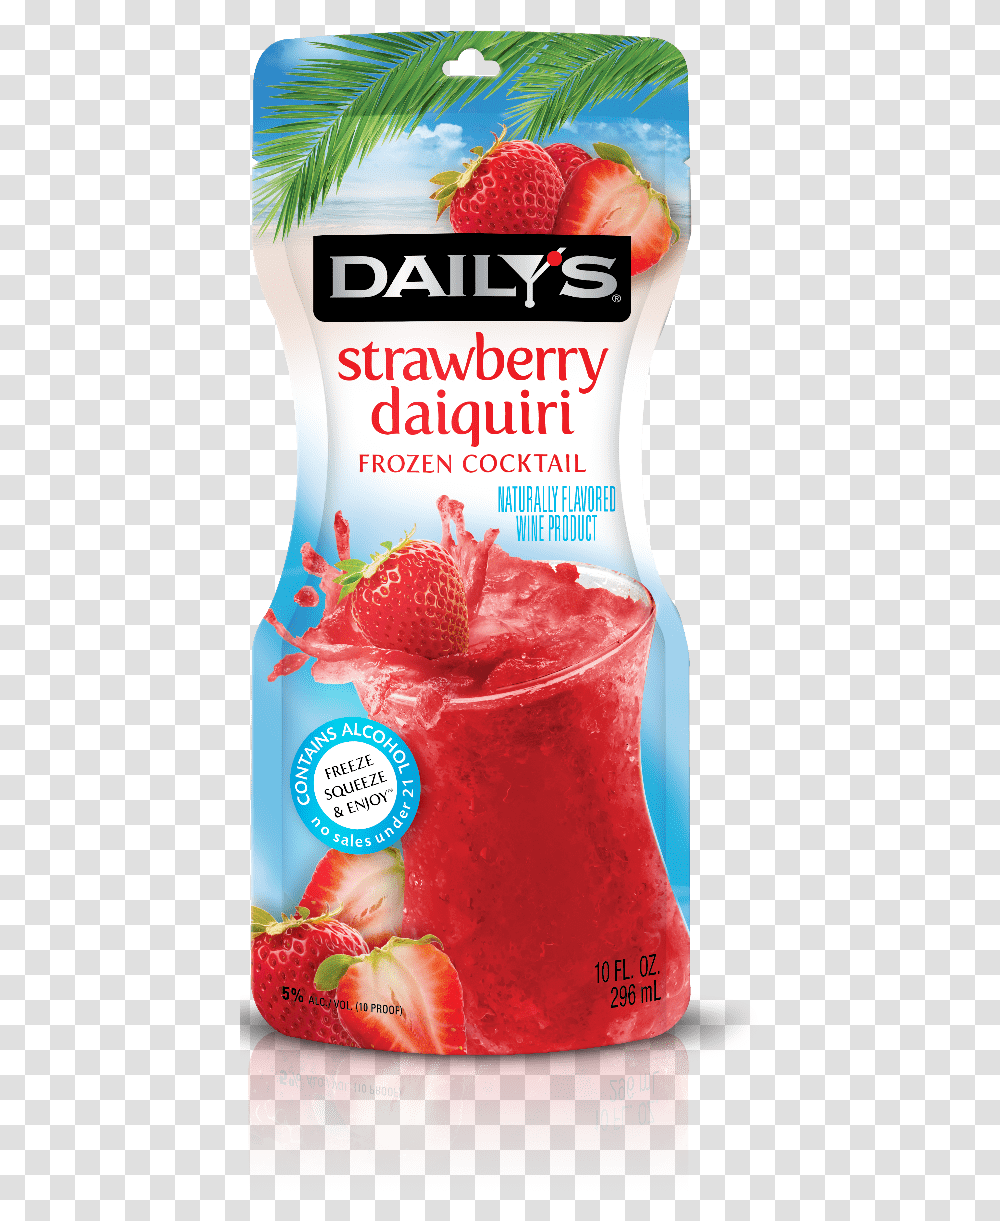 Dailys Rtd Strawb Daiq Pouch 8 4pk Daily's Frozen Drinks, Juice, Beverage, Food, Smoothie Transparent Png